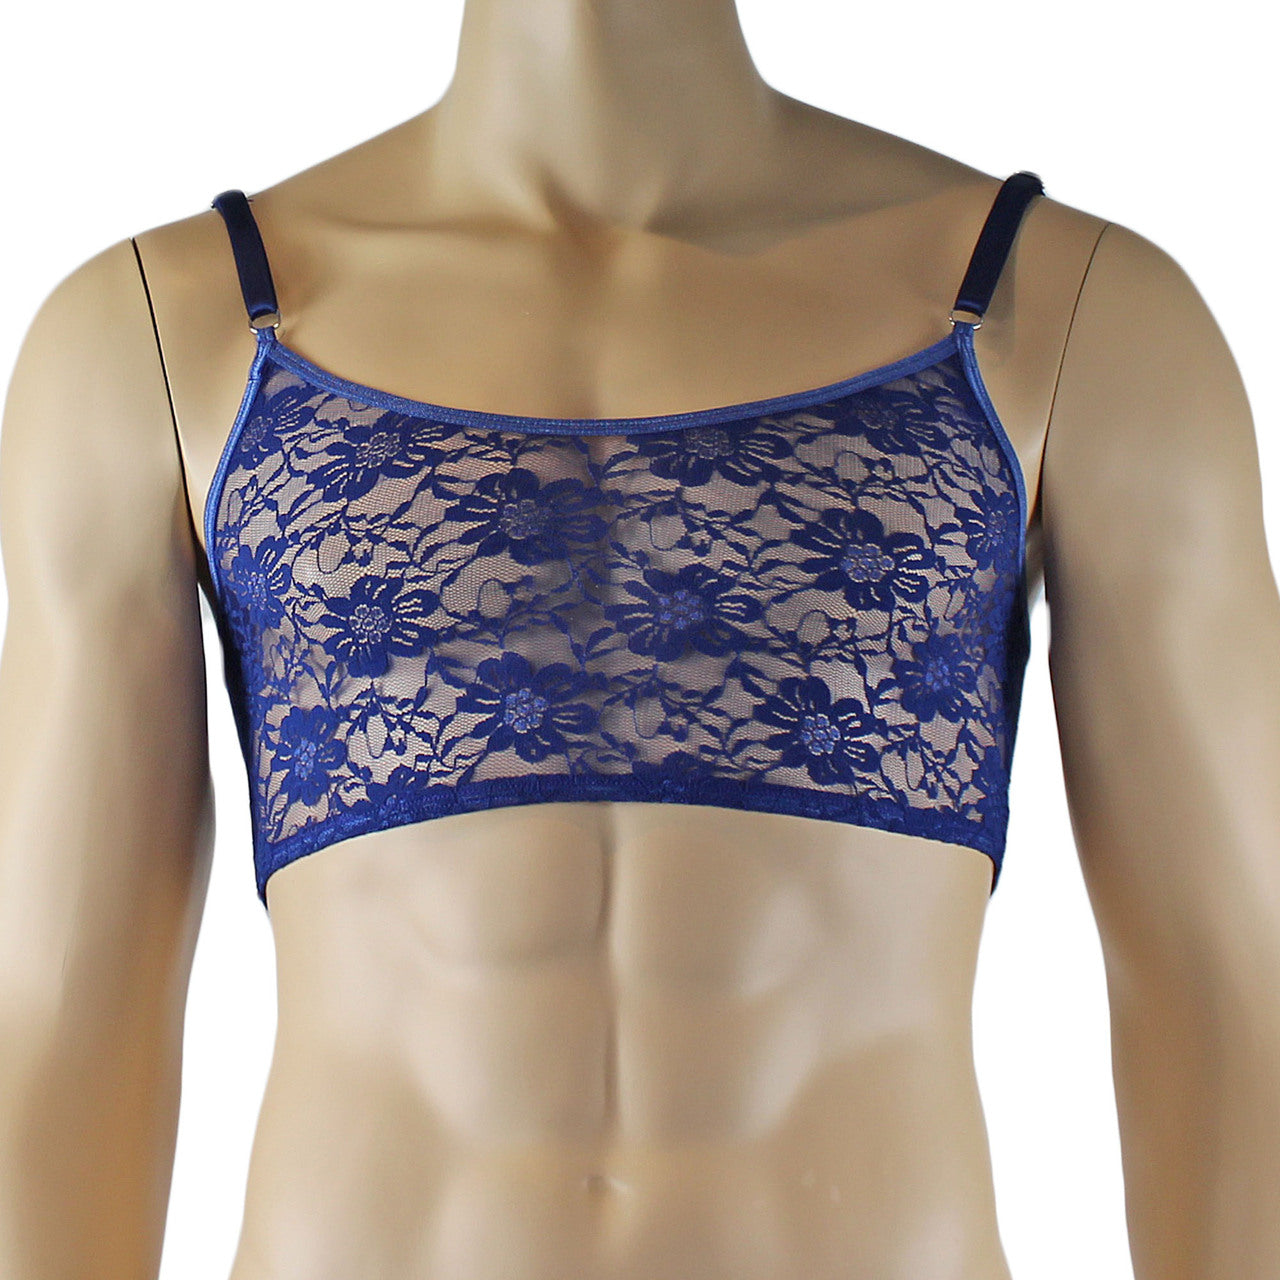 LAST ORDERS - Mens Sexy Lace Crop Top Bra and Matching Lace Thong Navy